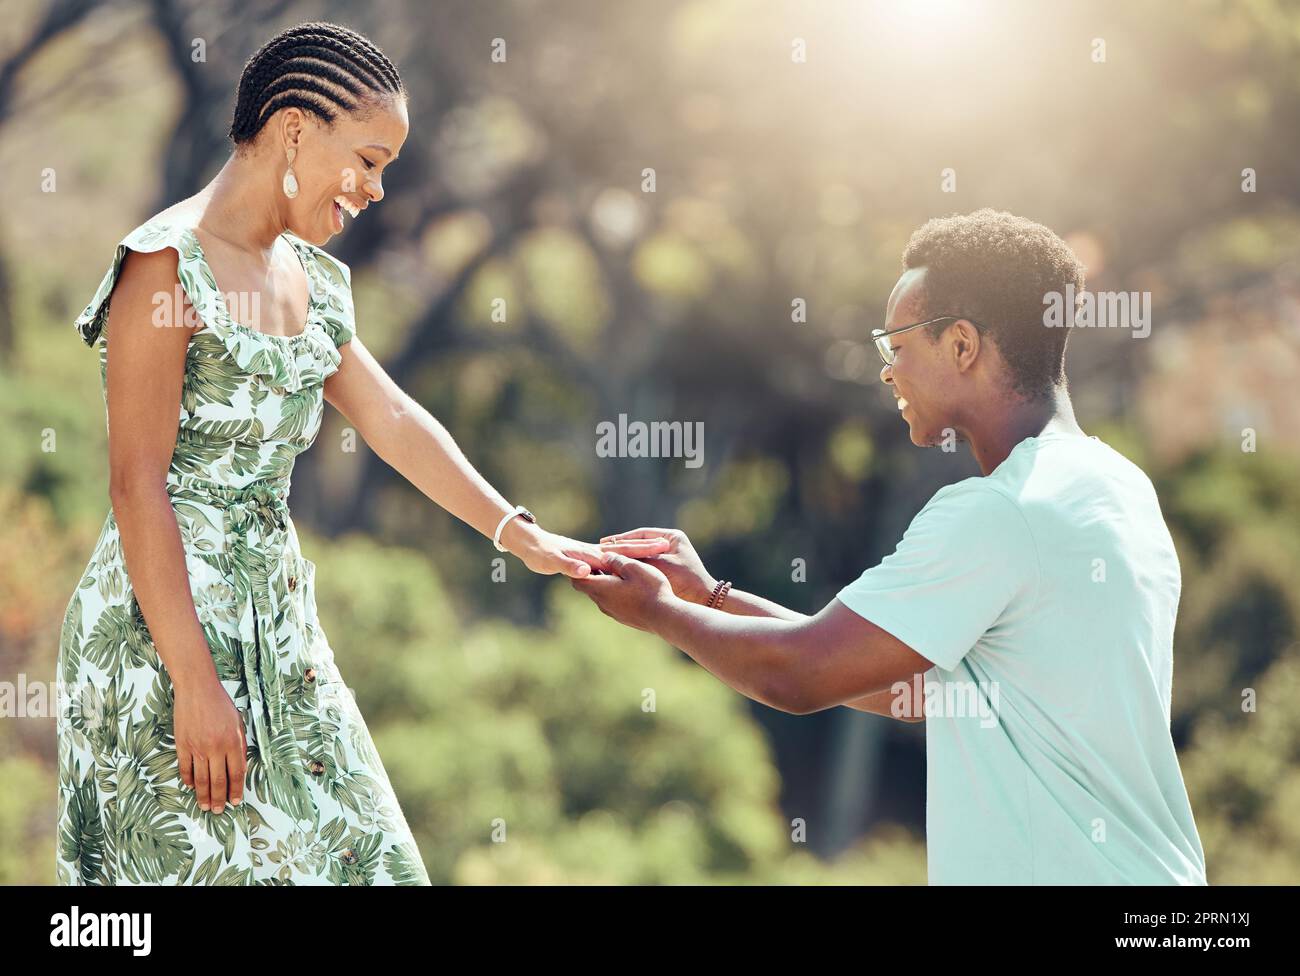 Love, engagement and black man propose to girlfriend on romantic date outdoors, happy and excited. African woman surprise sweet gesture, enjoying special relationship moment on outdoor date together Stock Photo